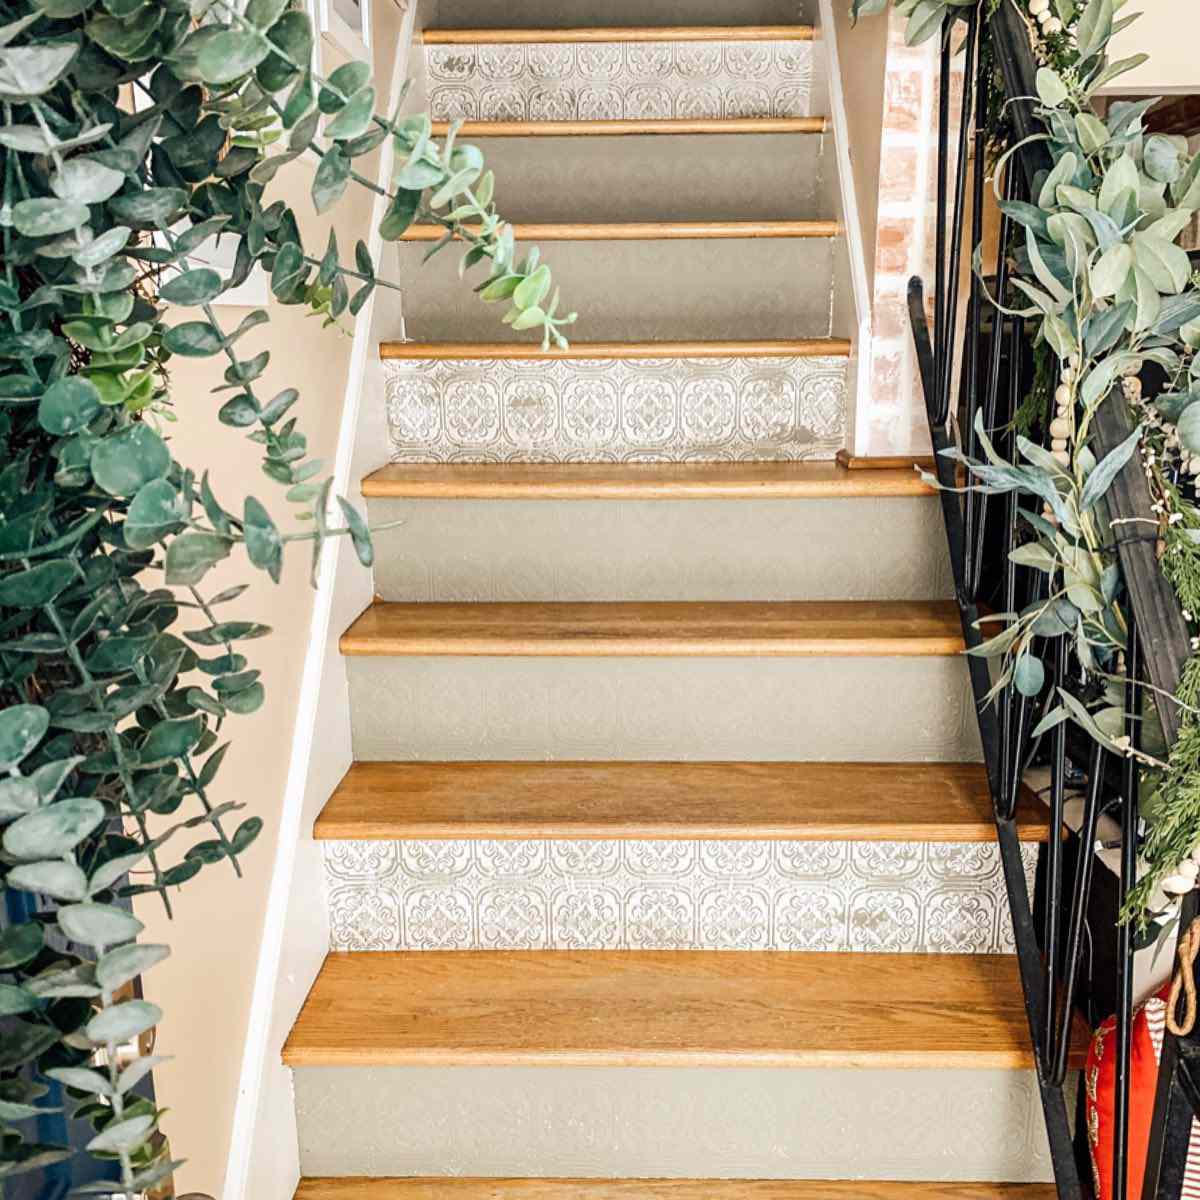 Update My Cape wallpapered stair risers